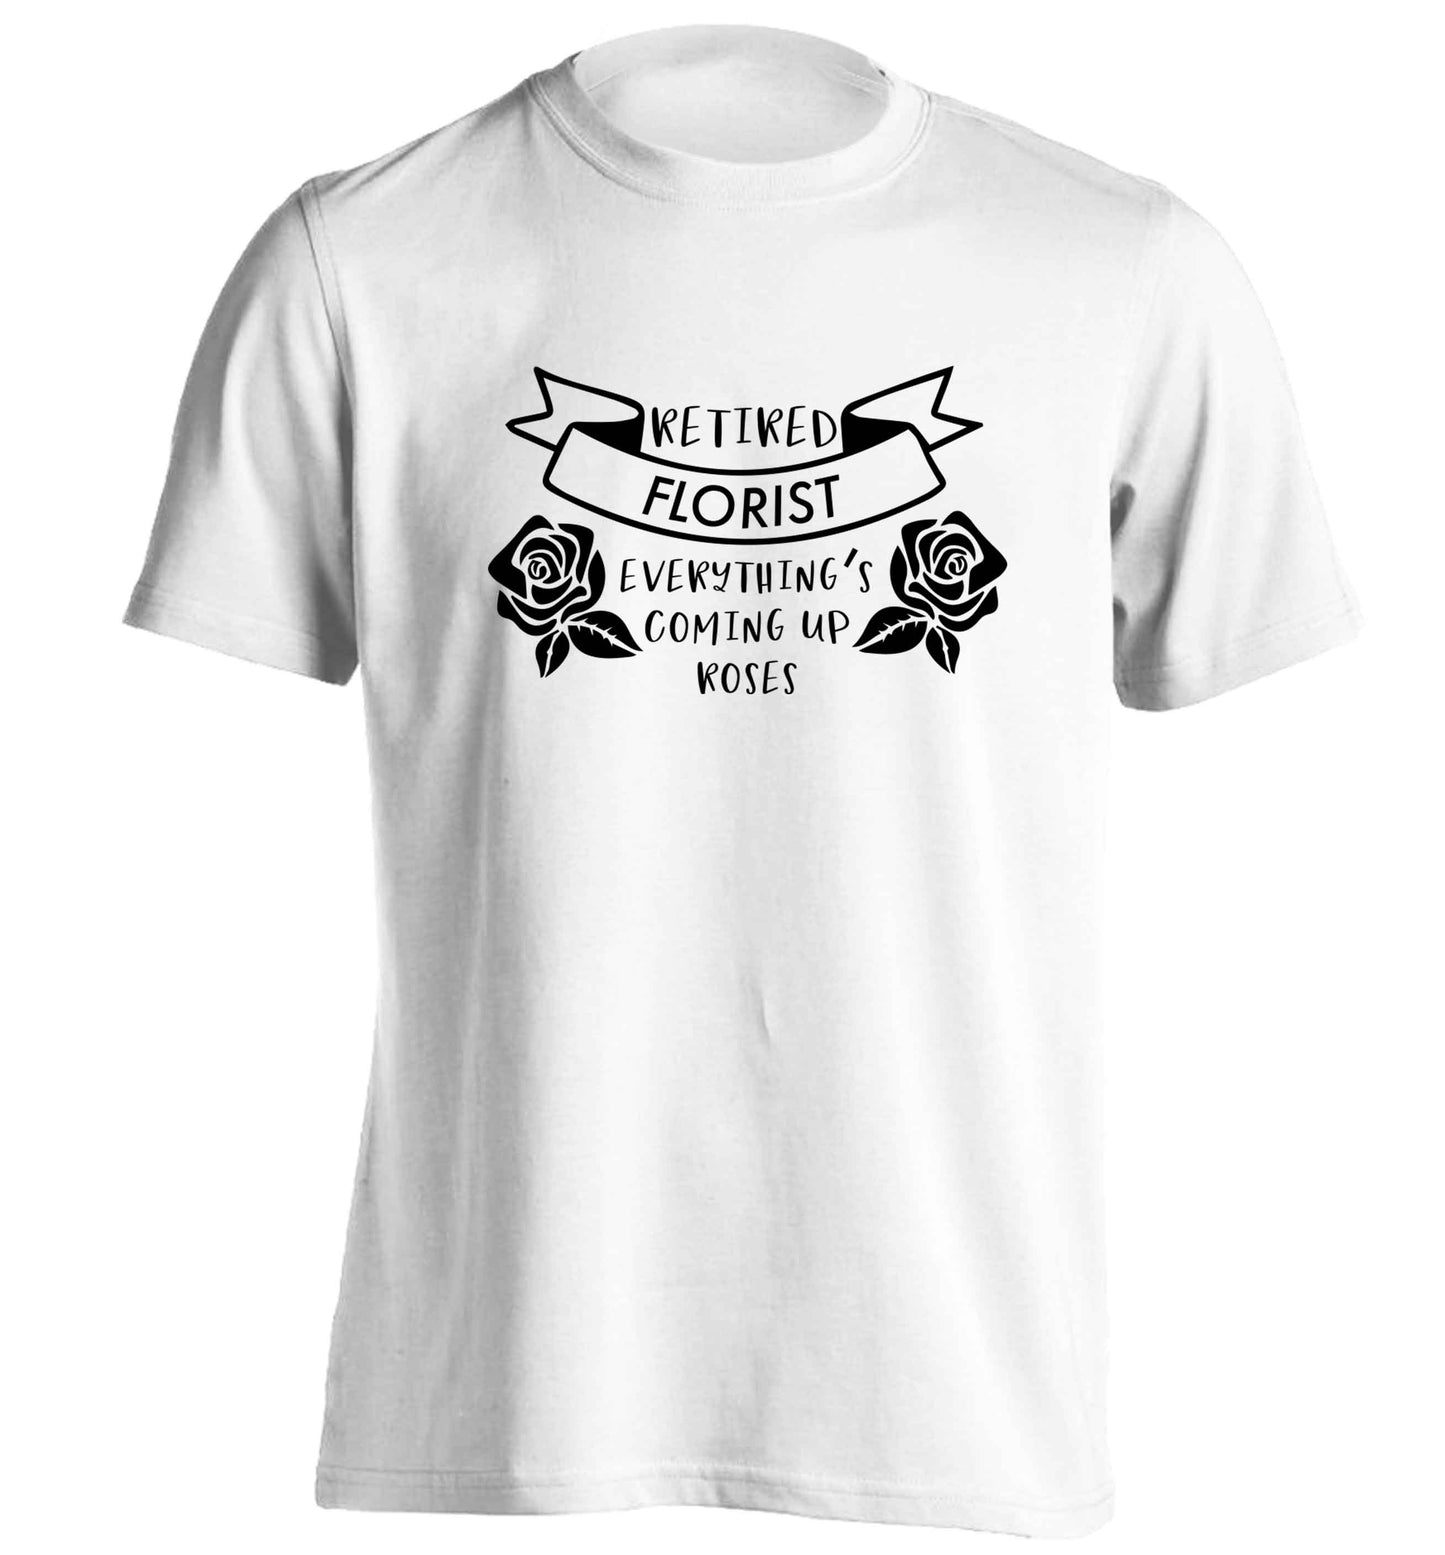 Retired florist everything's coming up roses adults unisex white Tshirt 2XL